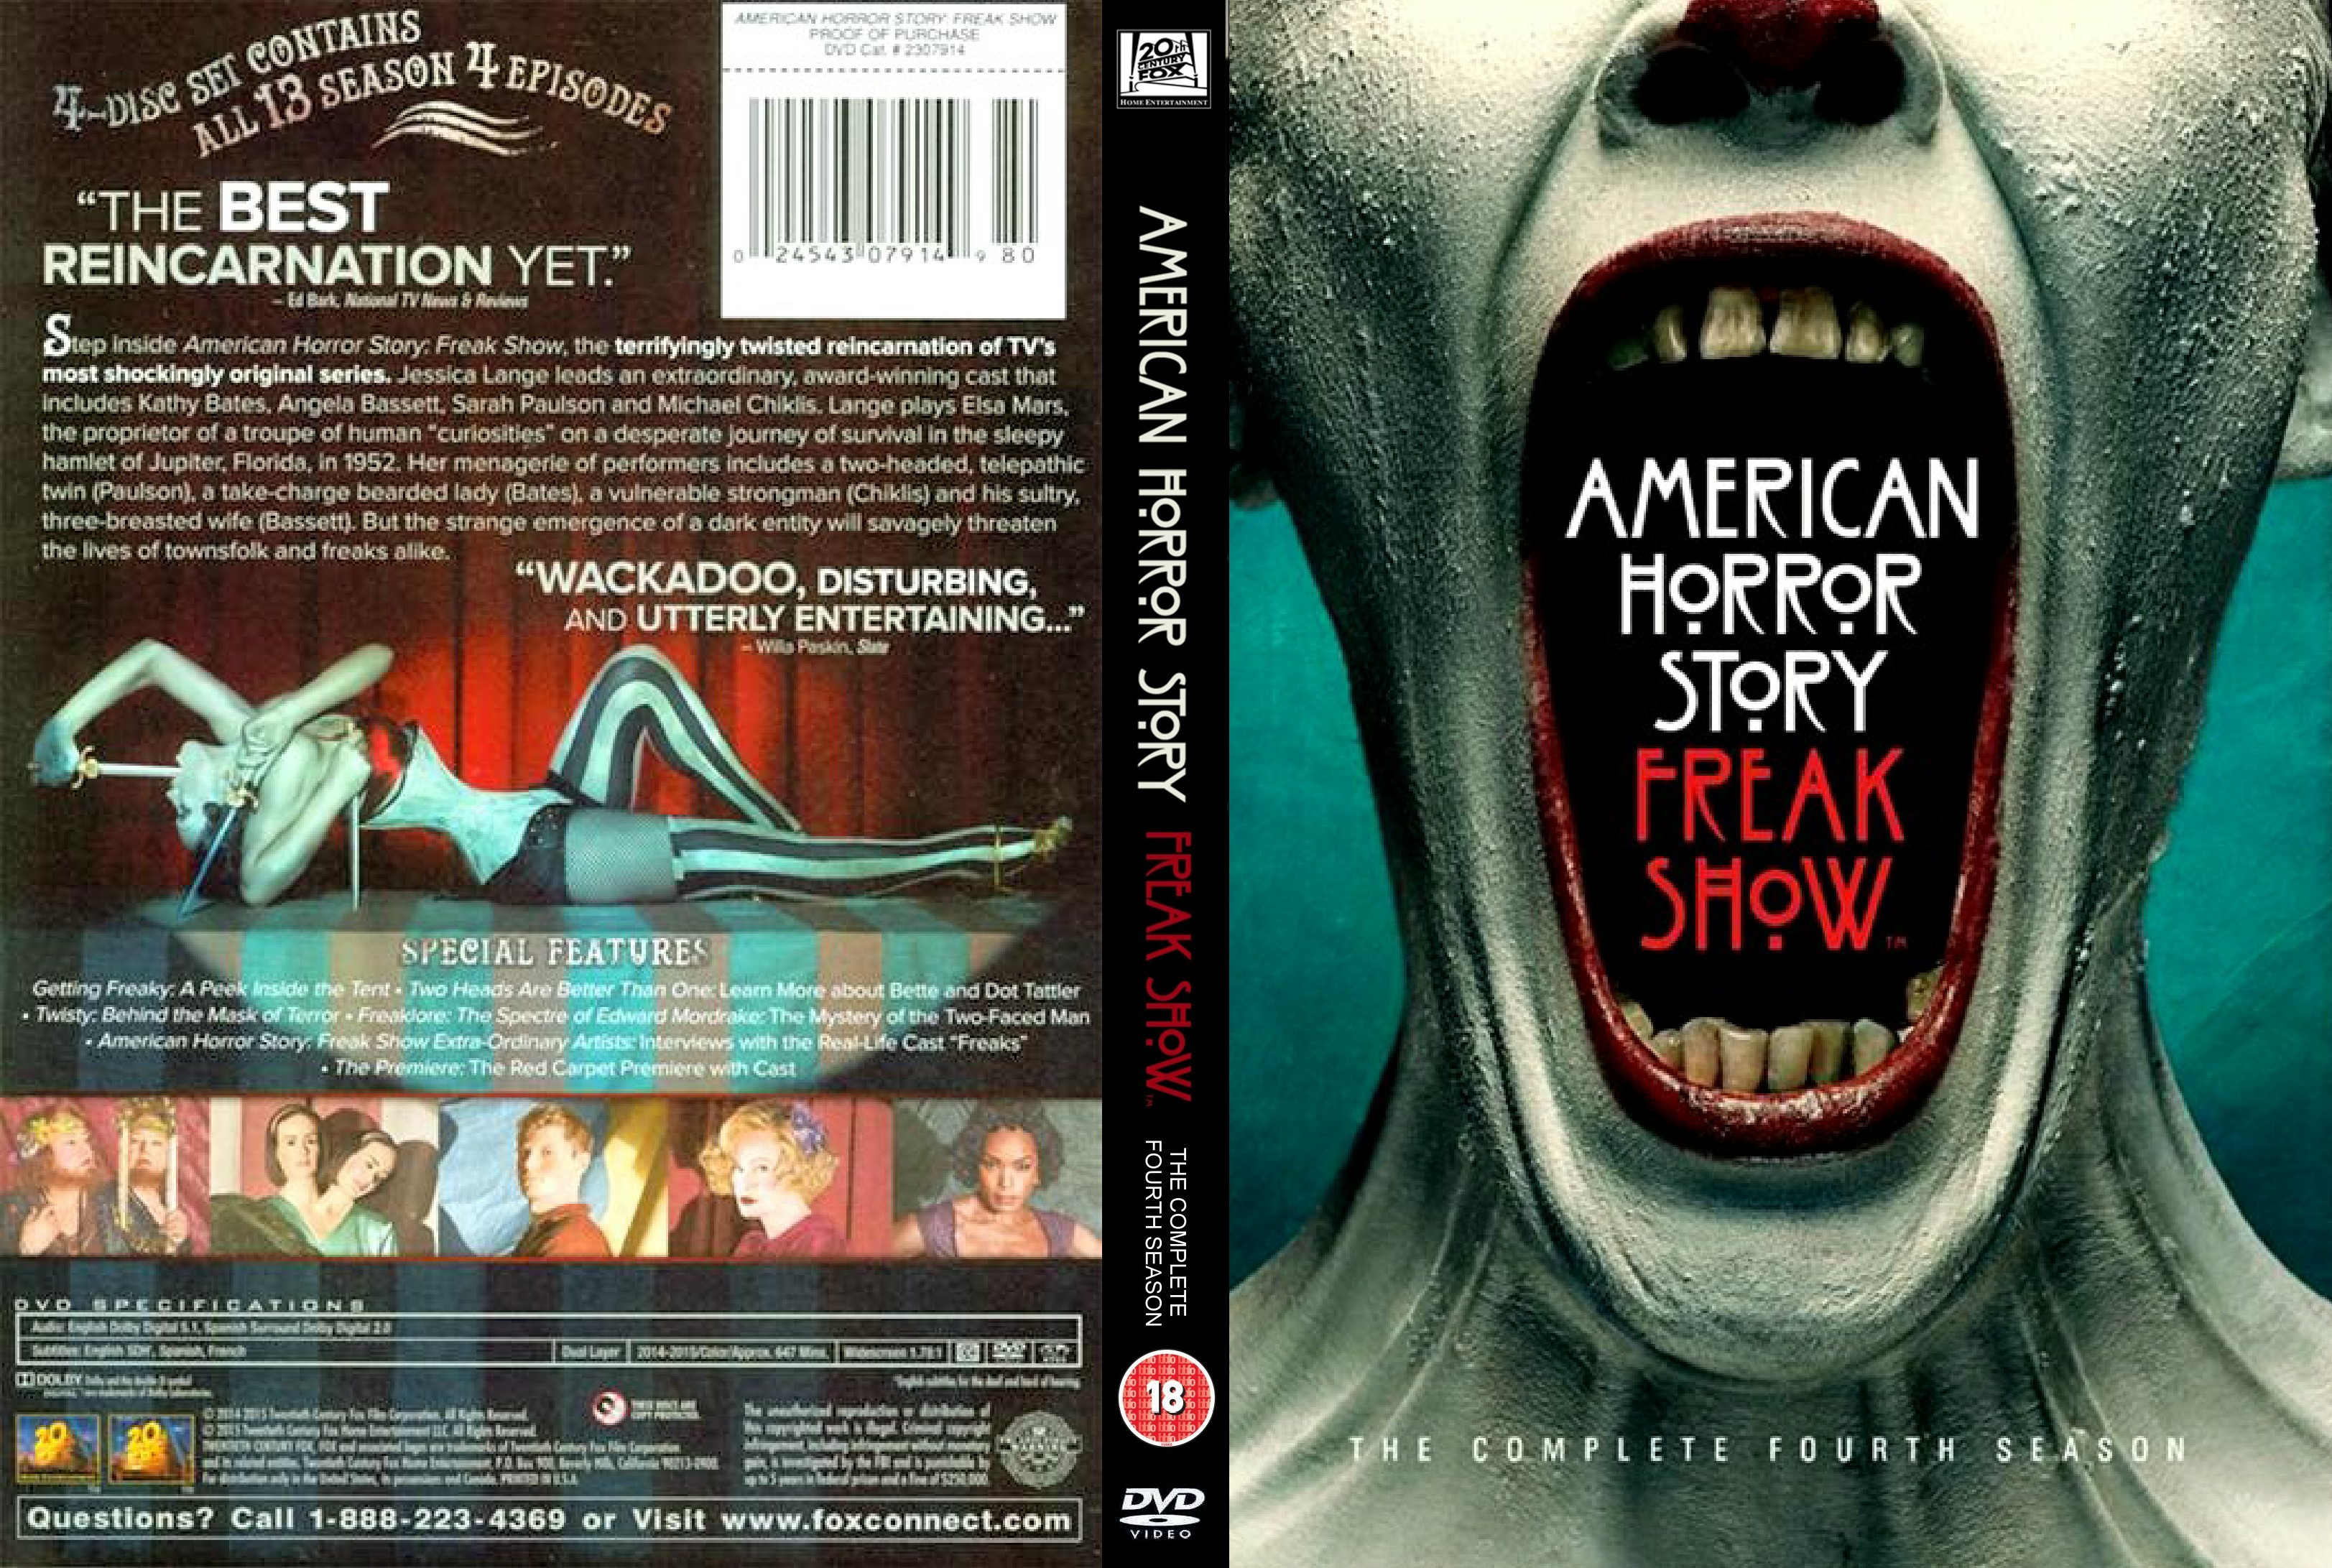 American horror story freakshow: extra-ordinary-artists